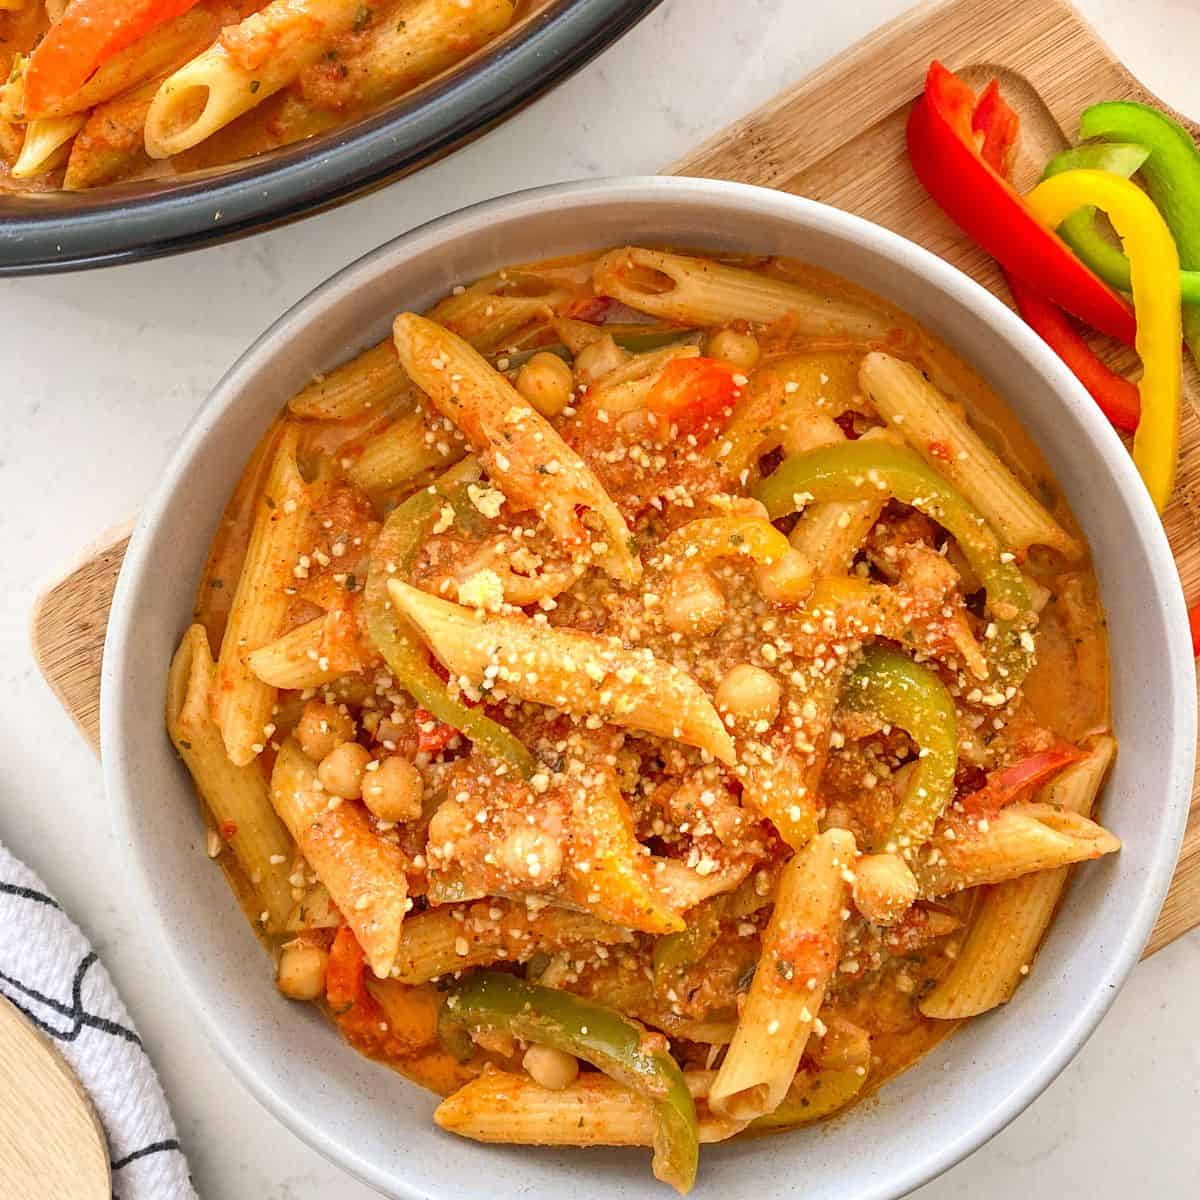 Bowl of pasta with bell peppers and chickpeas inside.